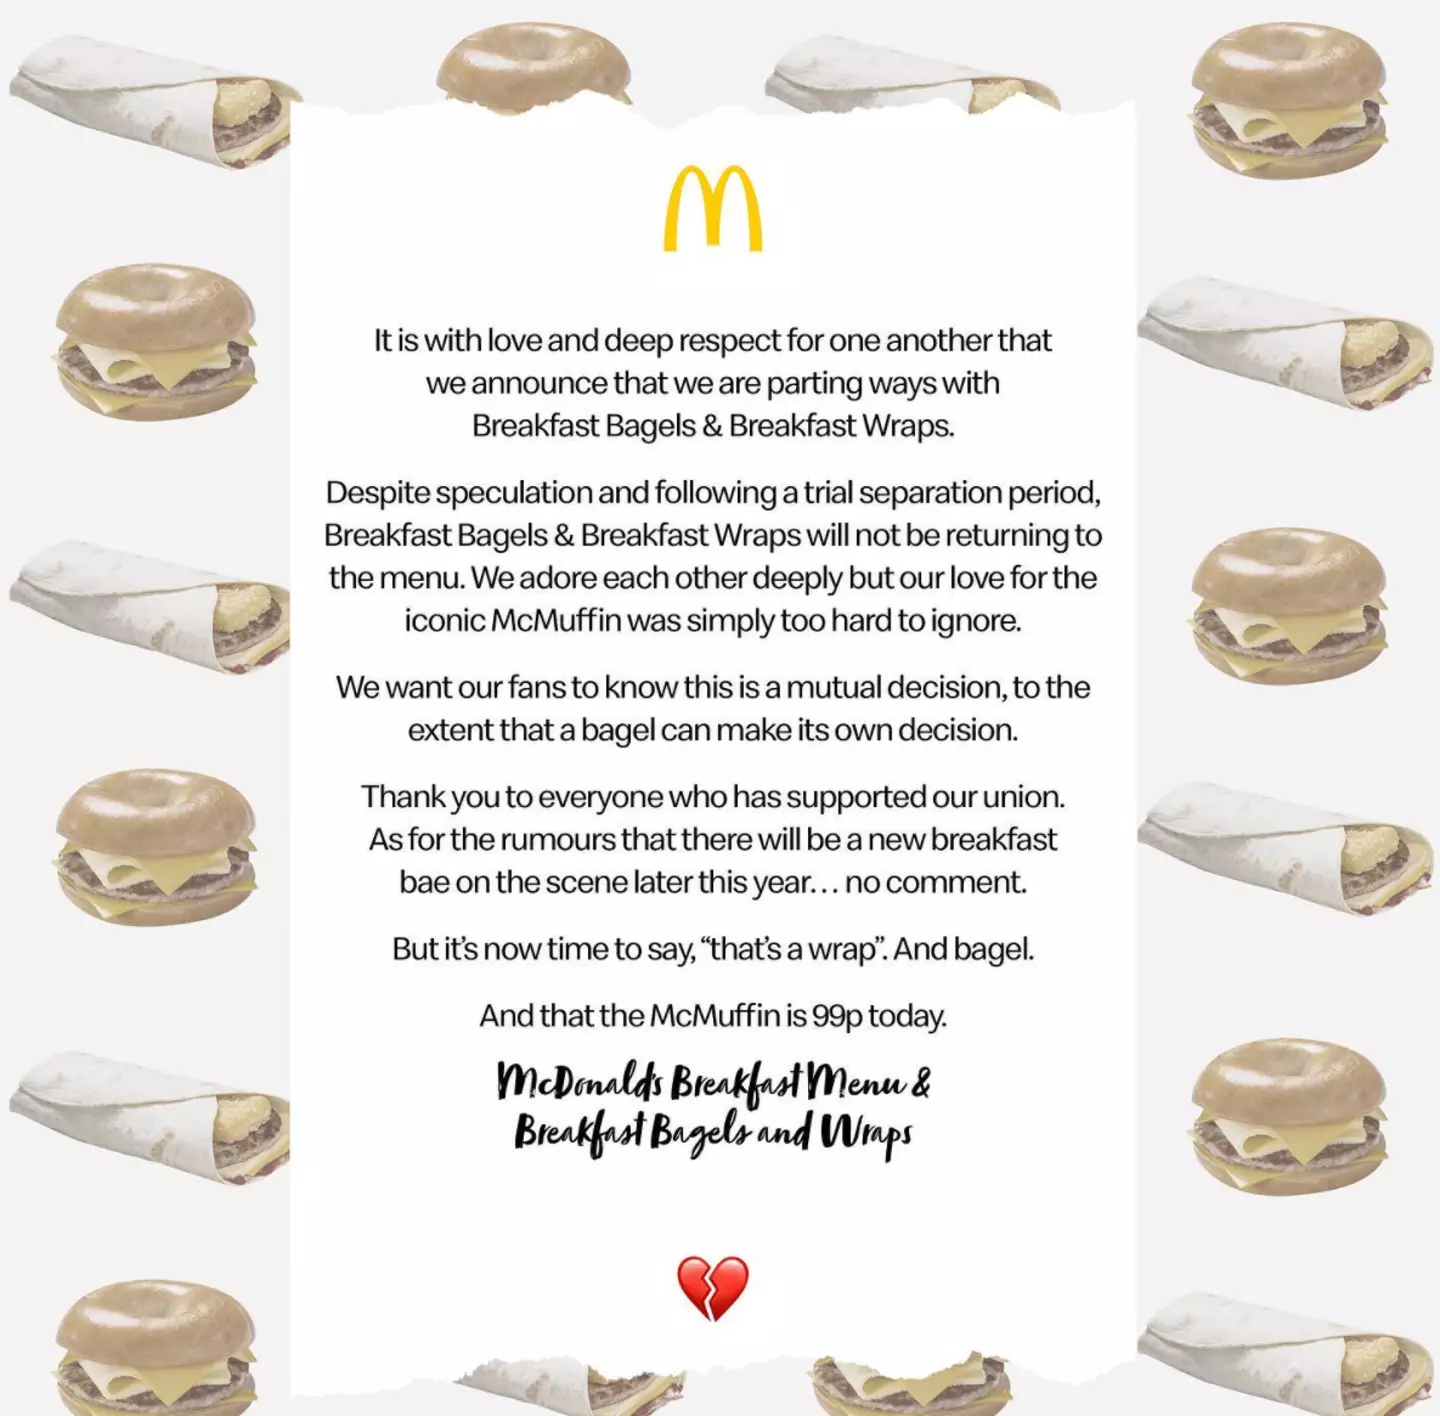 McDonald's released the statement on Monday morning (